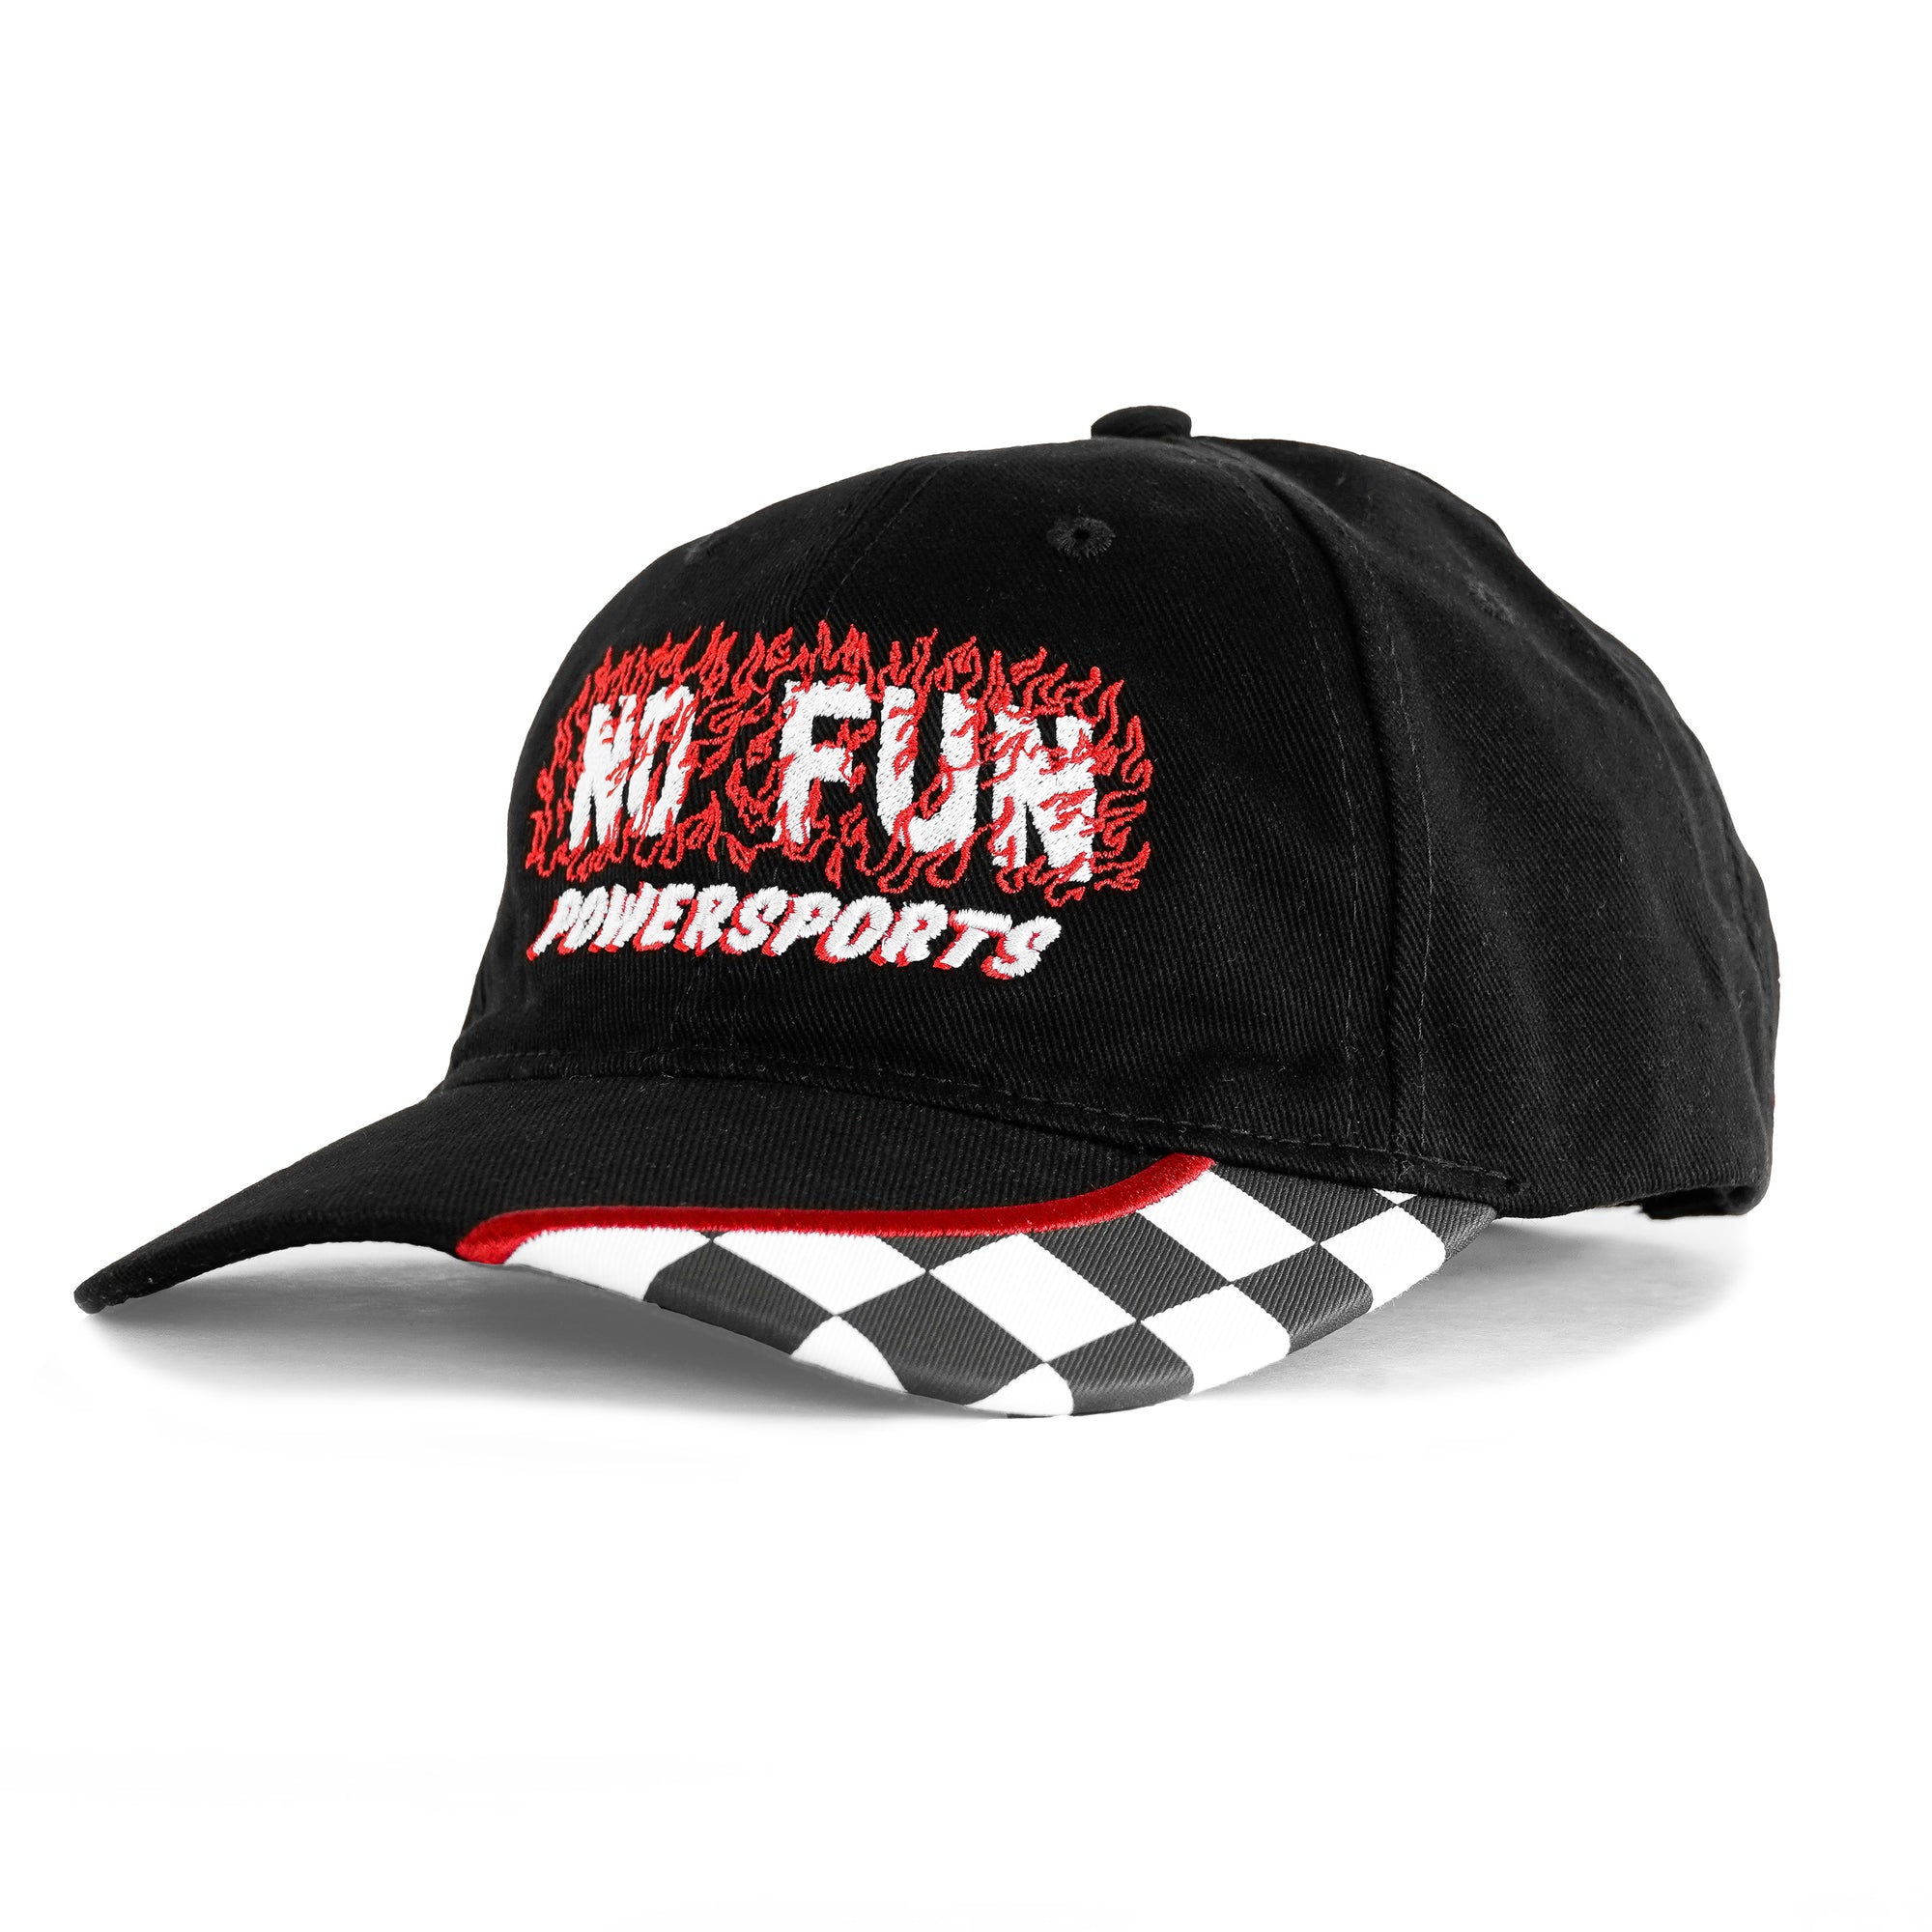 The "Speed" Hat in Tar Black by No Fun®.  The baseball style hat is black, with a black, white, and red checkerboard detail on the brim.  The text "No Fun® Powersports" is embroidered on the front in white, surrounded by red embroidery flames.